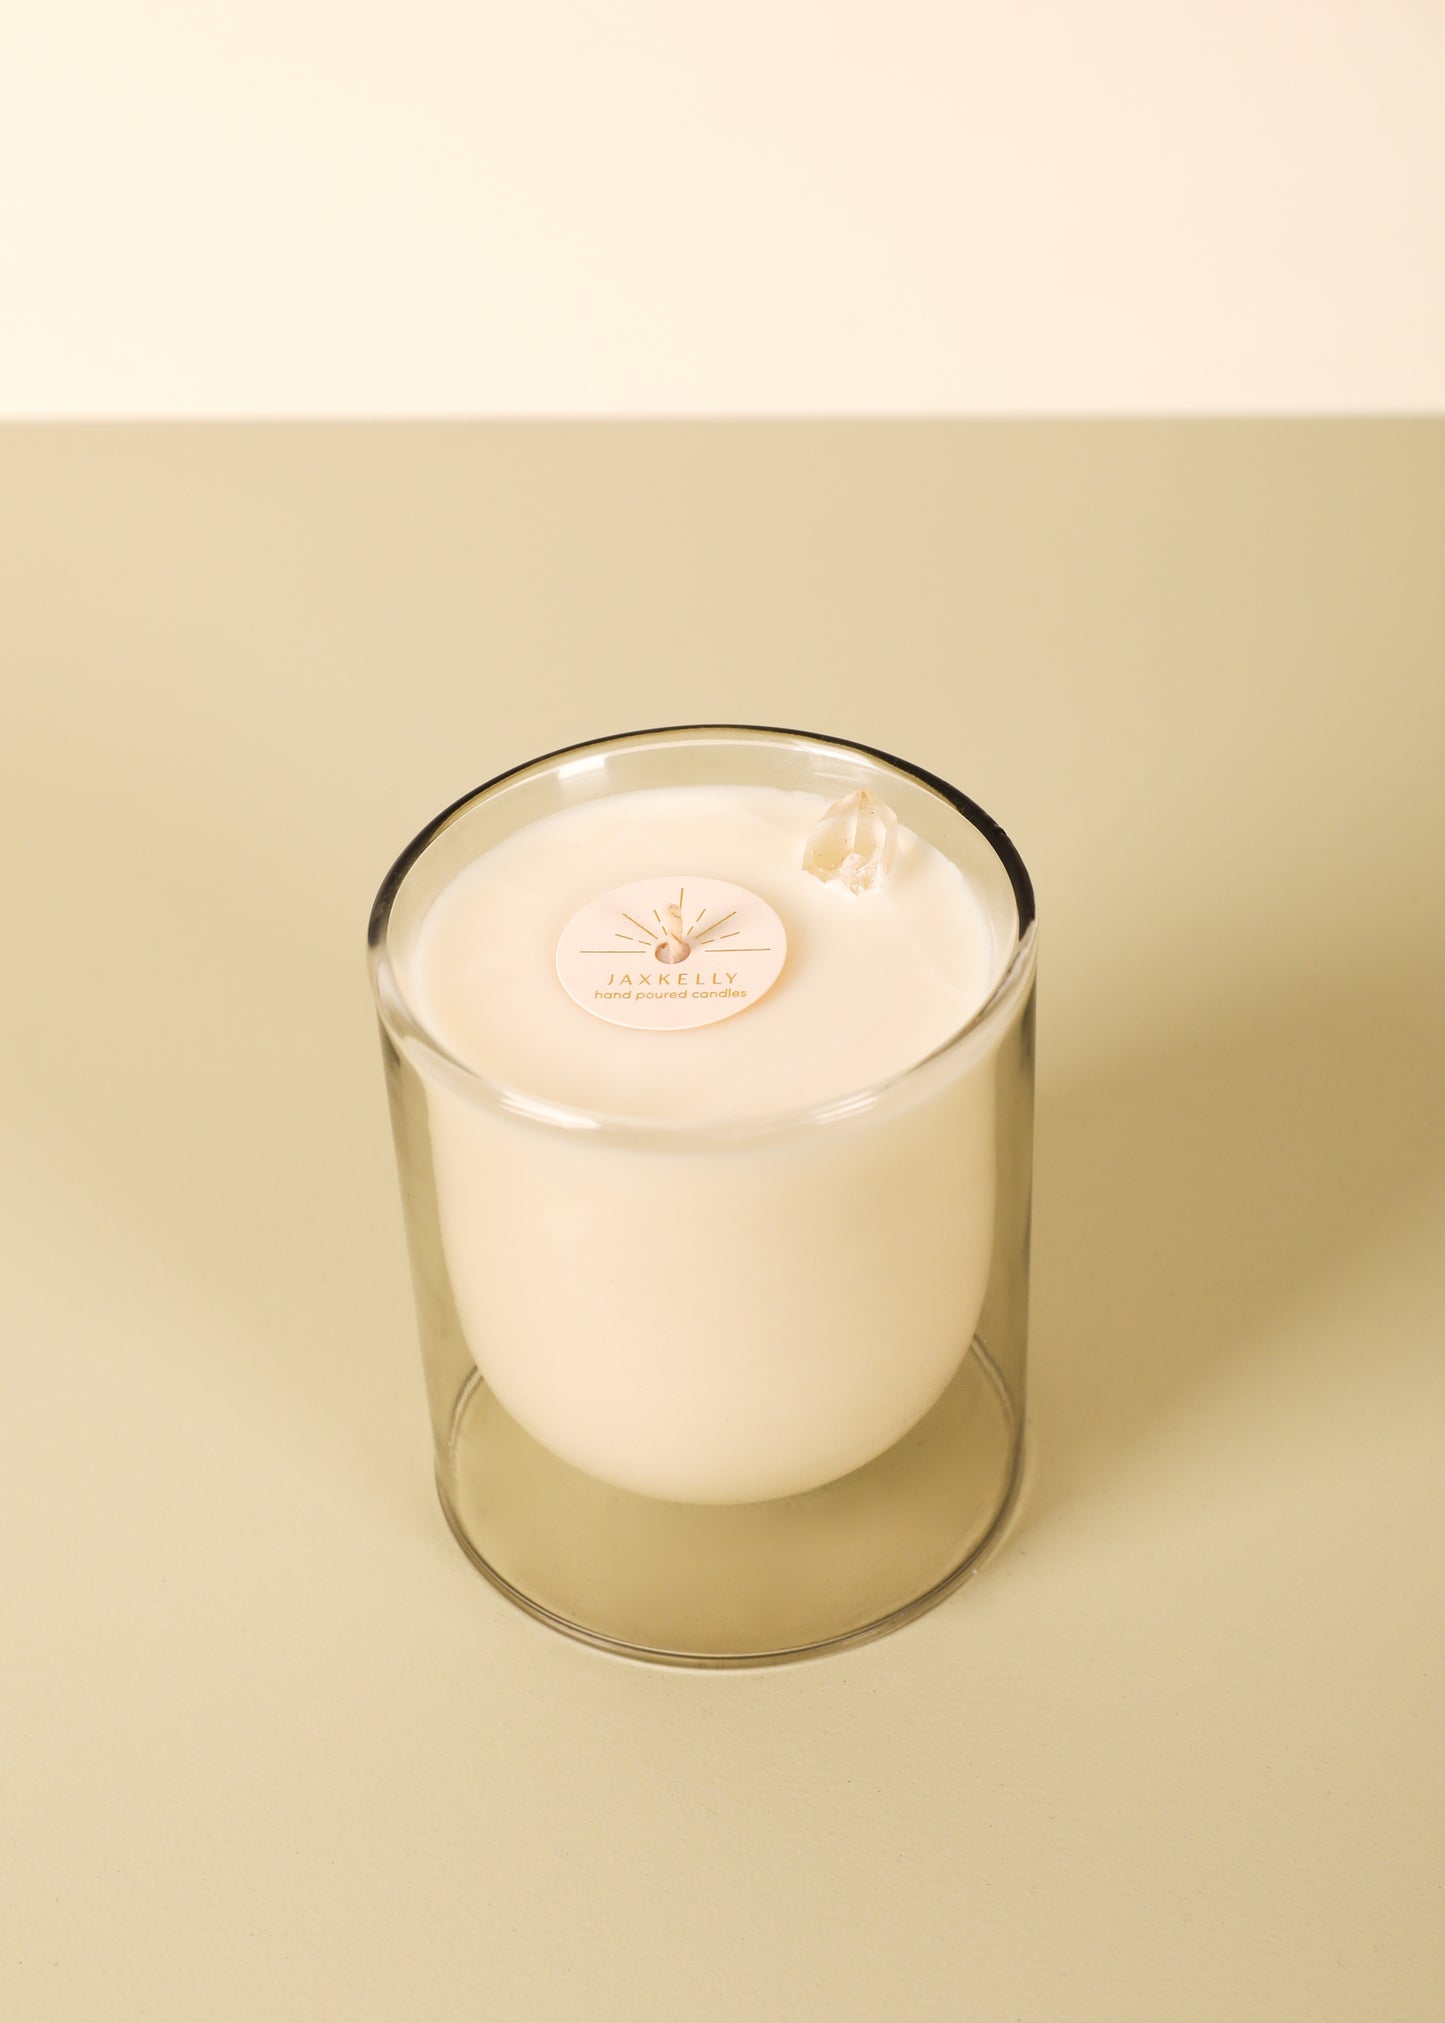 Moss Scooped Candle - Ambiance Collection